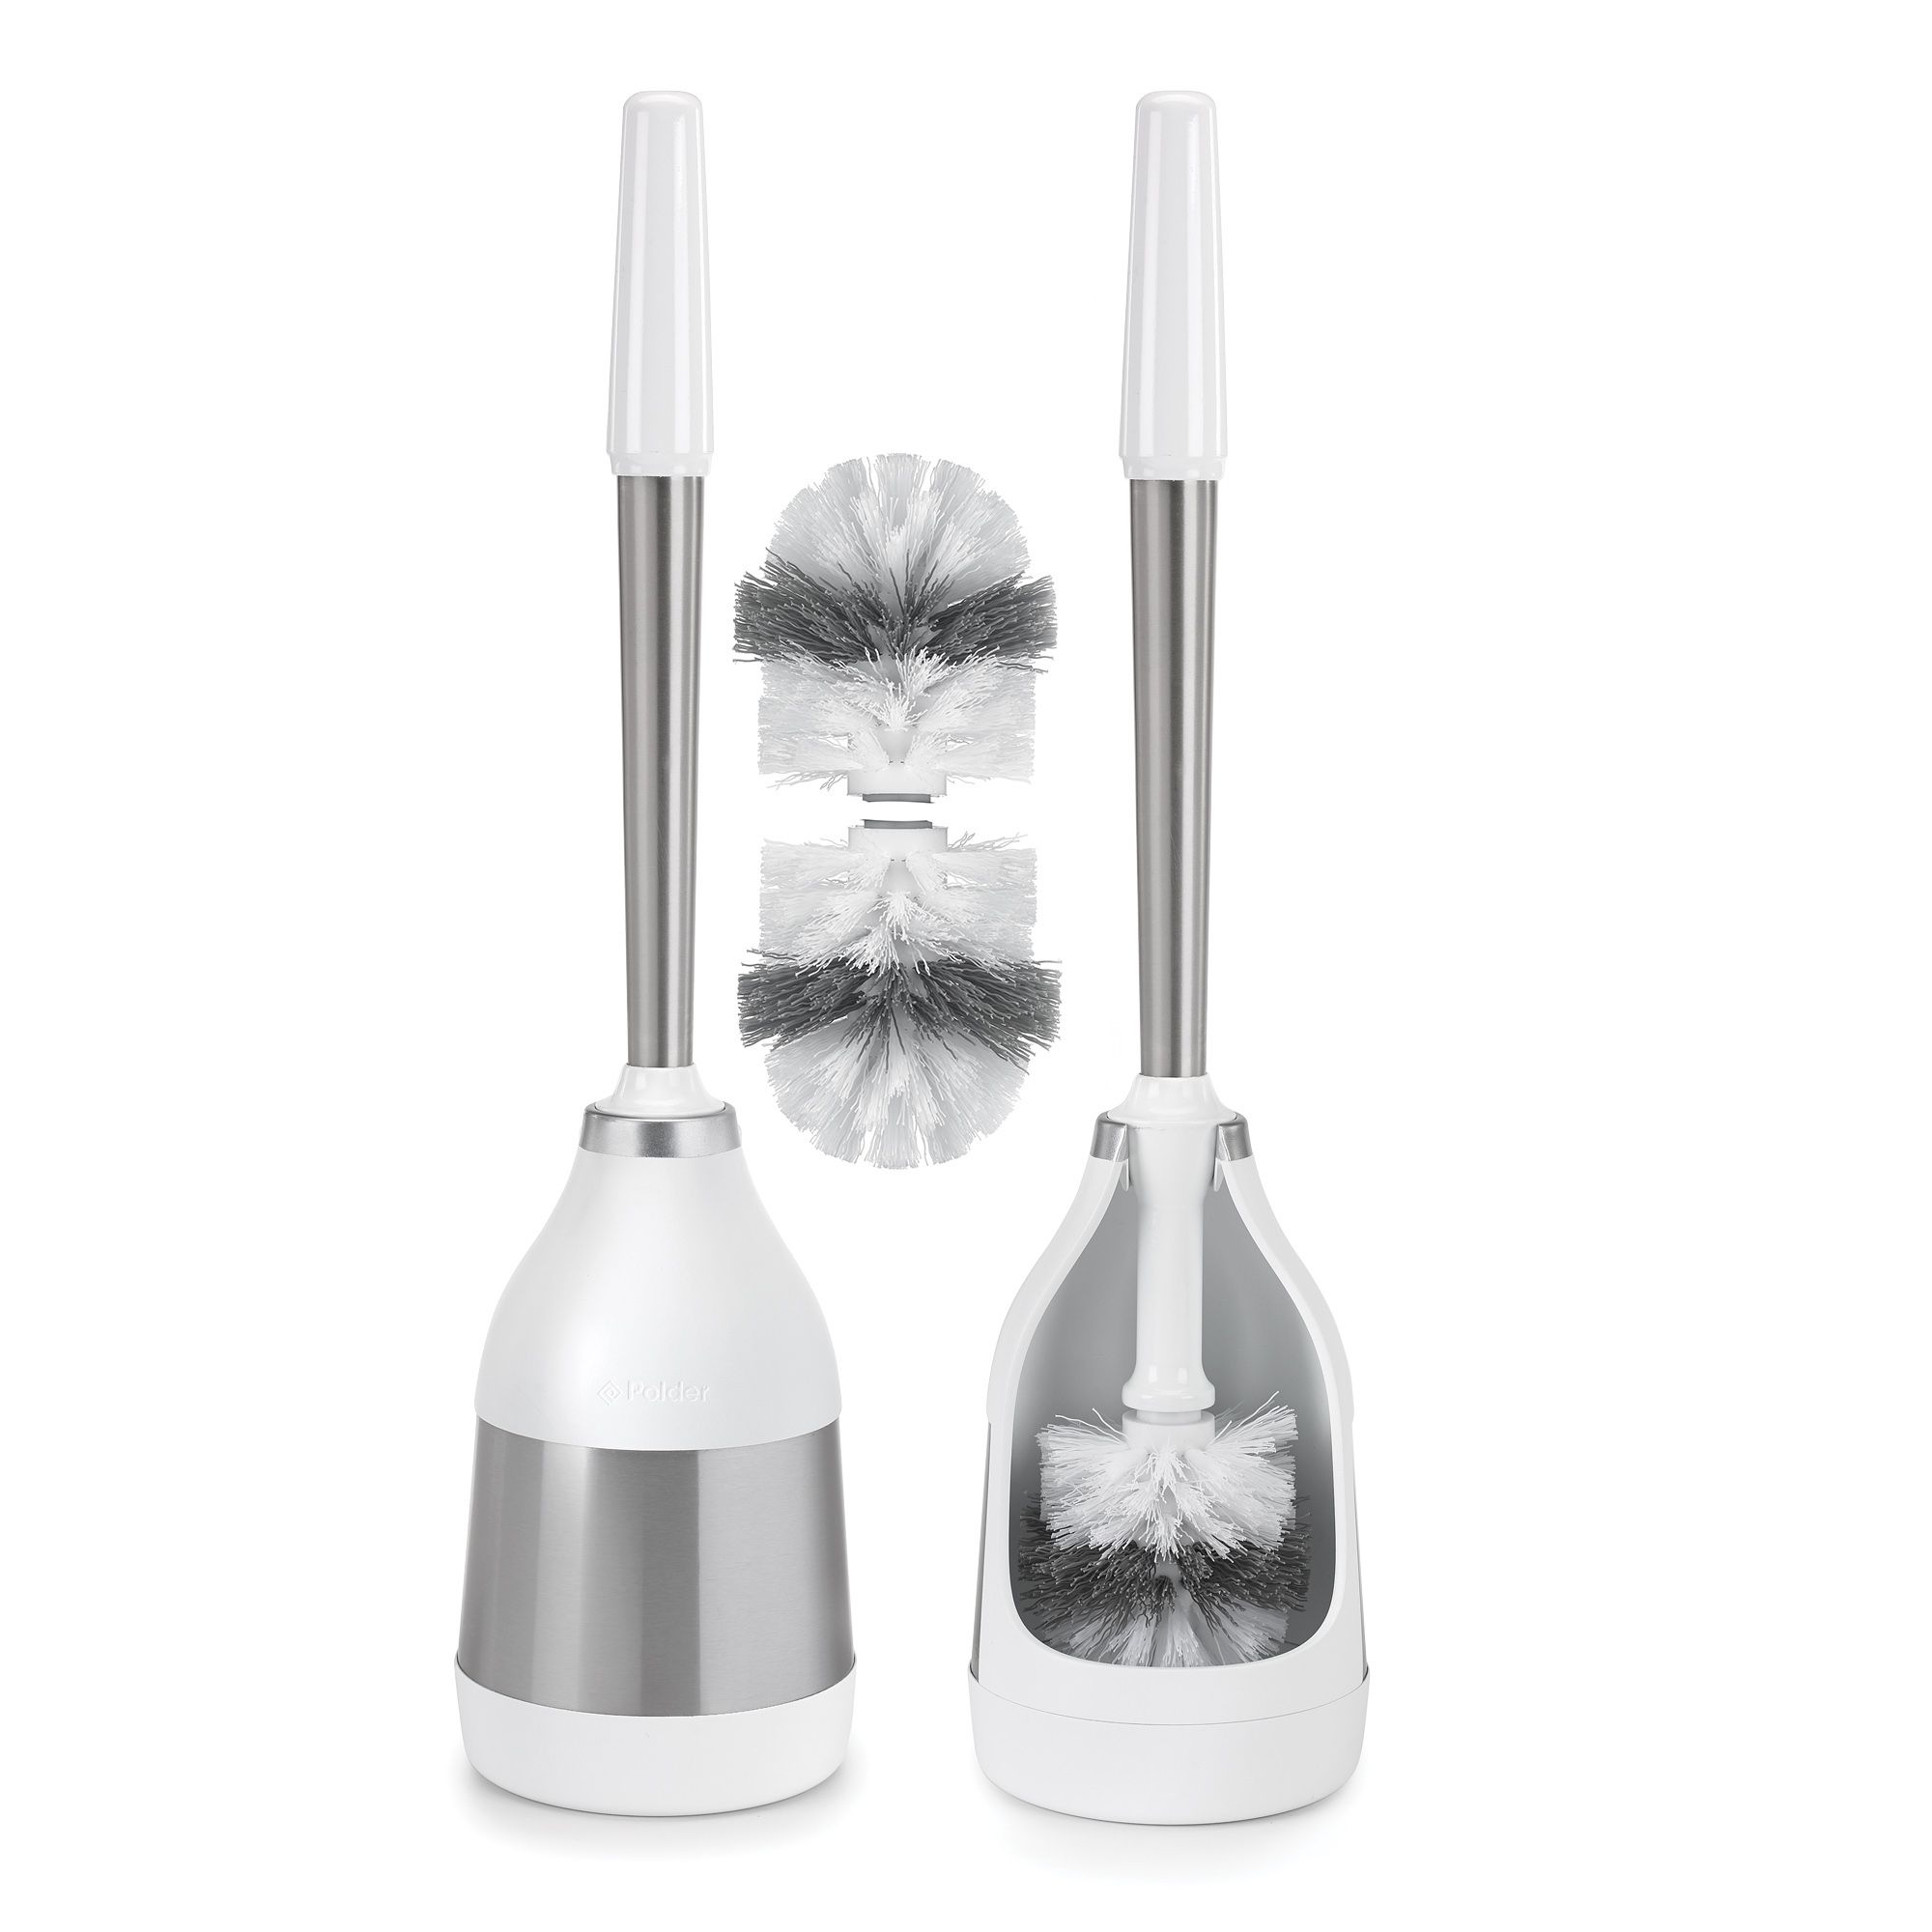 Great Value Bowl Brush Plunger and Caddy, White